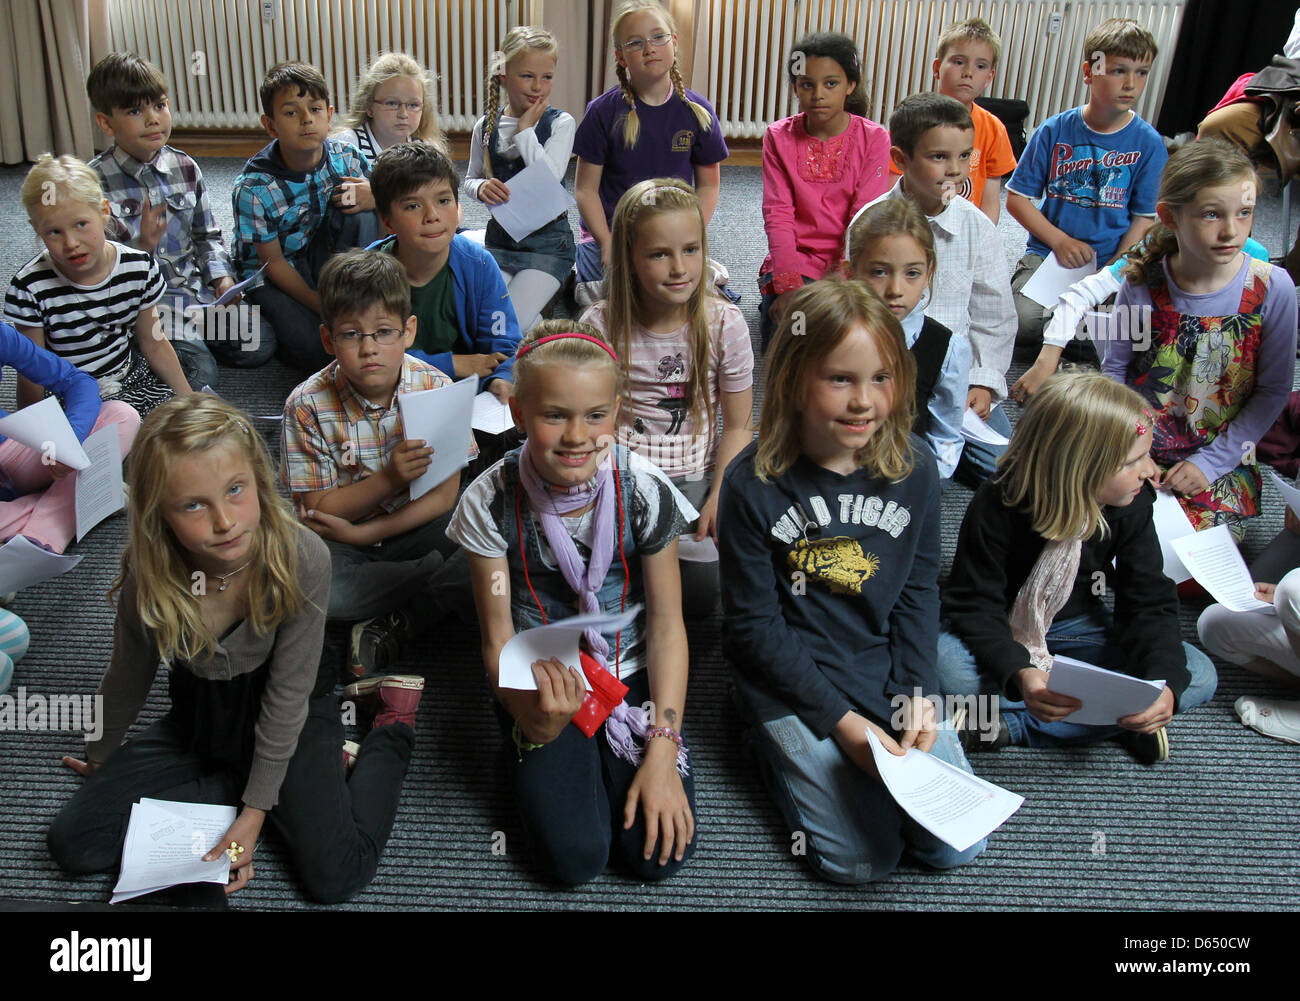 2nd year pupils wait for their turn at the 11th Rostock Reading Aloud Contest for primary school children at Waldemarhof in Rostock, Germany, 07 June 2012. The reading aloud contest 'Rostock Reading Worms' takes place on to days. 30 schools take part with 30 pupils per grade reading aloud for their parents, guests and the jury. Photo: Bernd Wuestneck Stock Photo